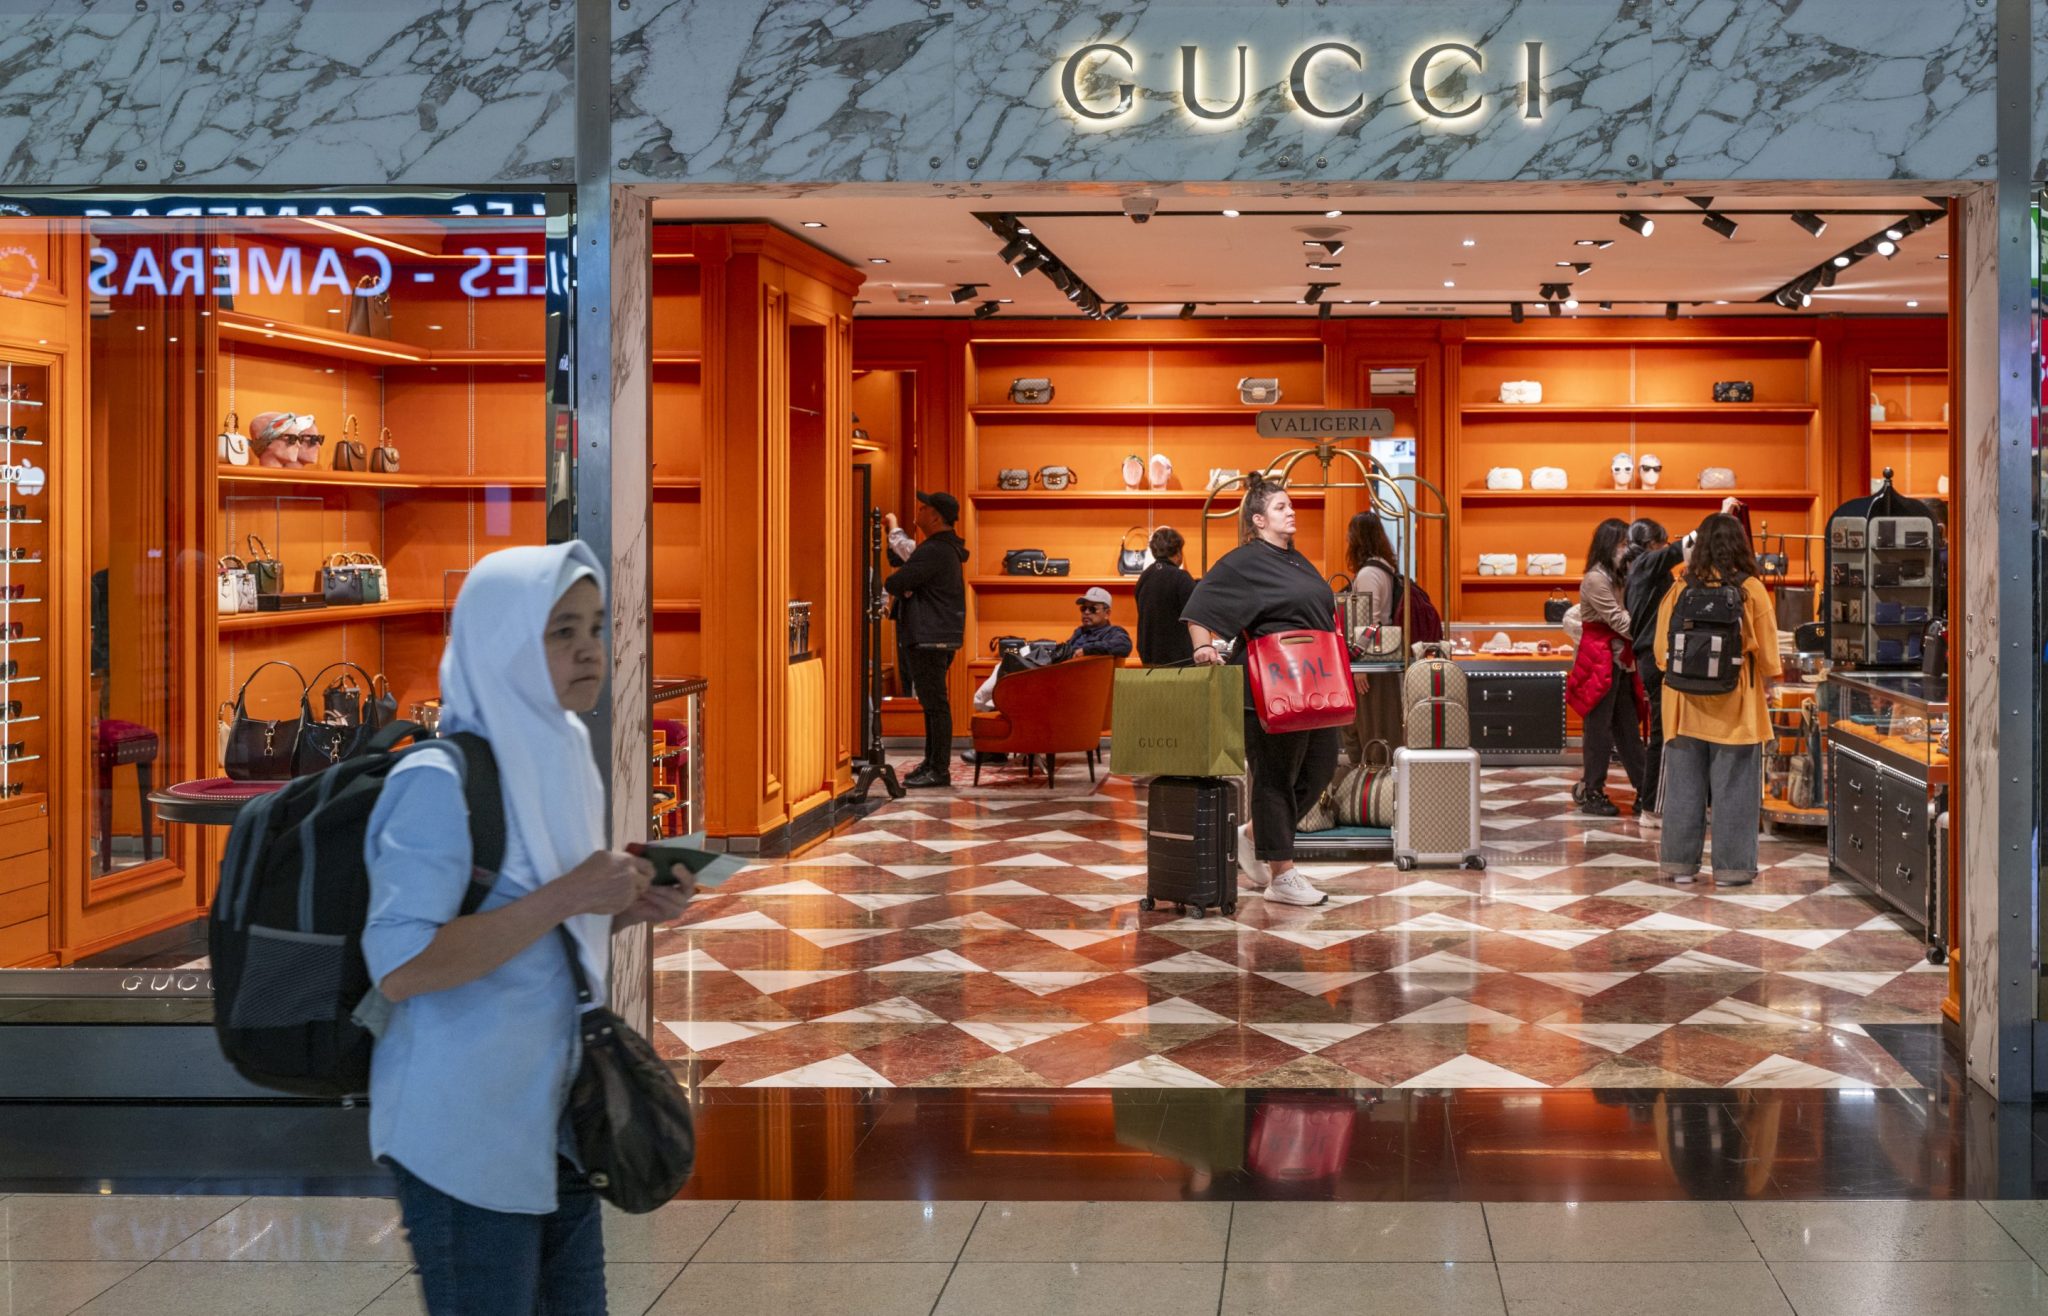 Gucci, YSL owner Kering issues profit warning as luxury sales stall